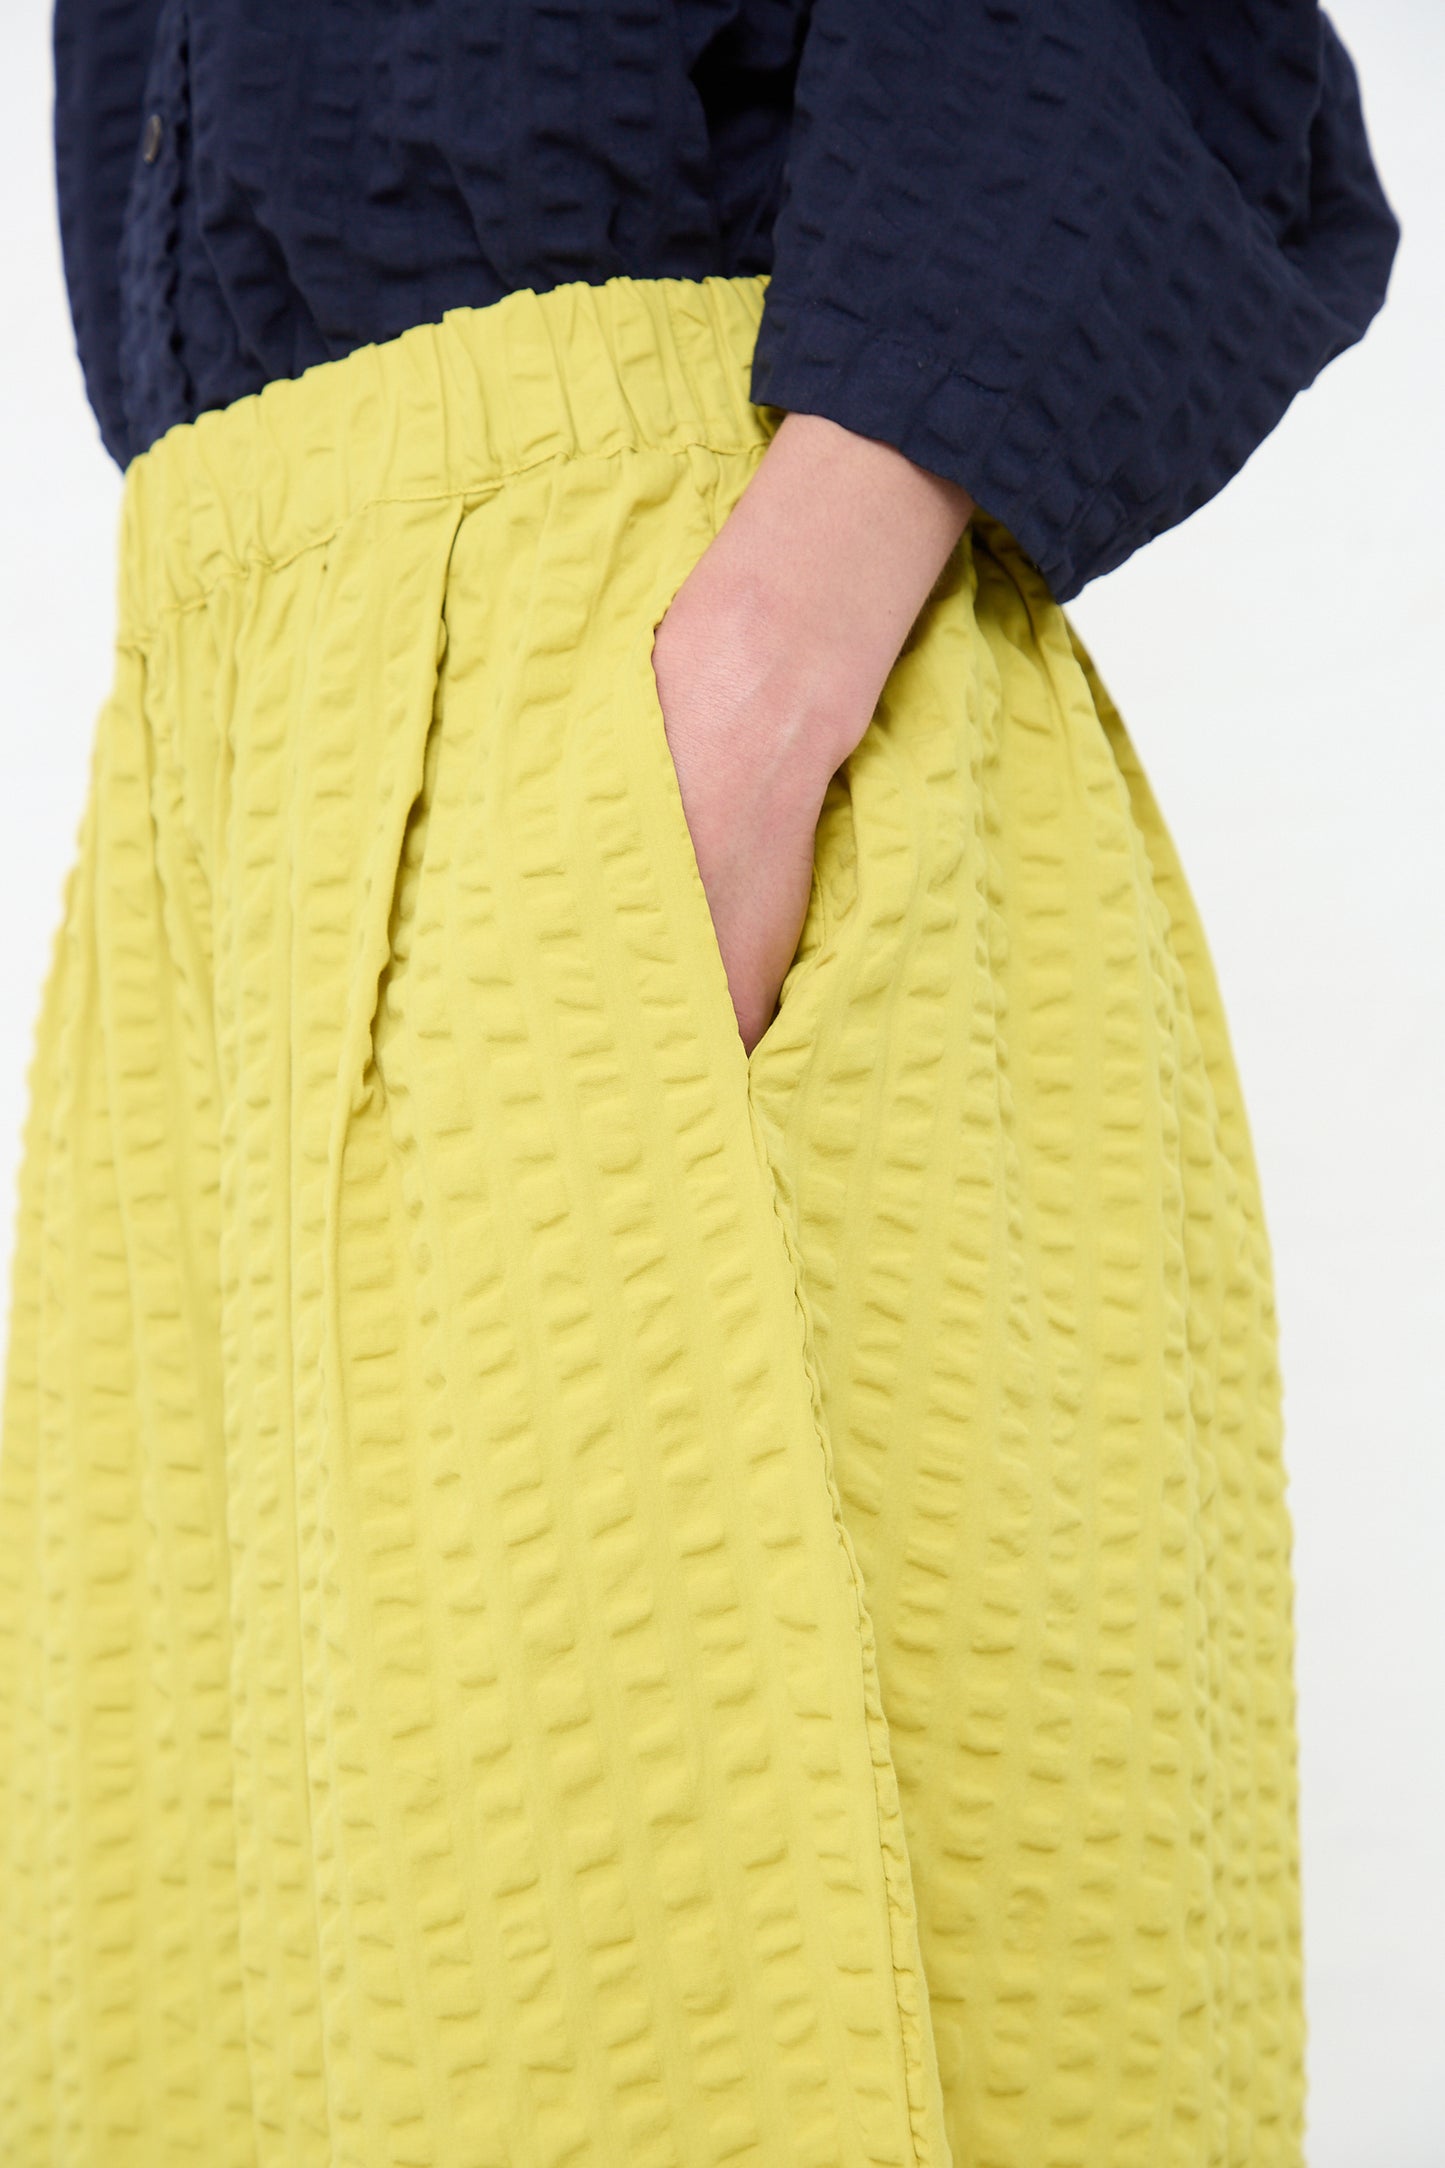 A person standing with their hand in the pocket of a yellow textured, Black Crane Cotton Seersucker Wide Pant in Turmeric.